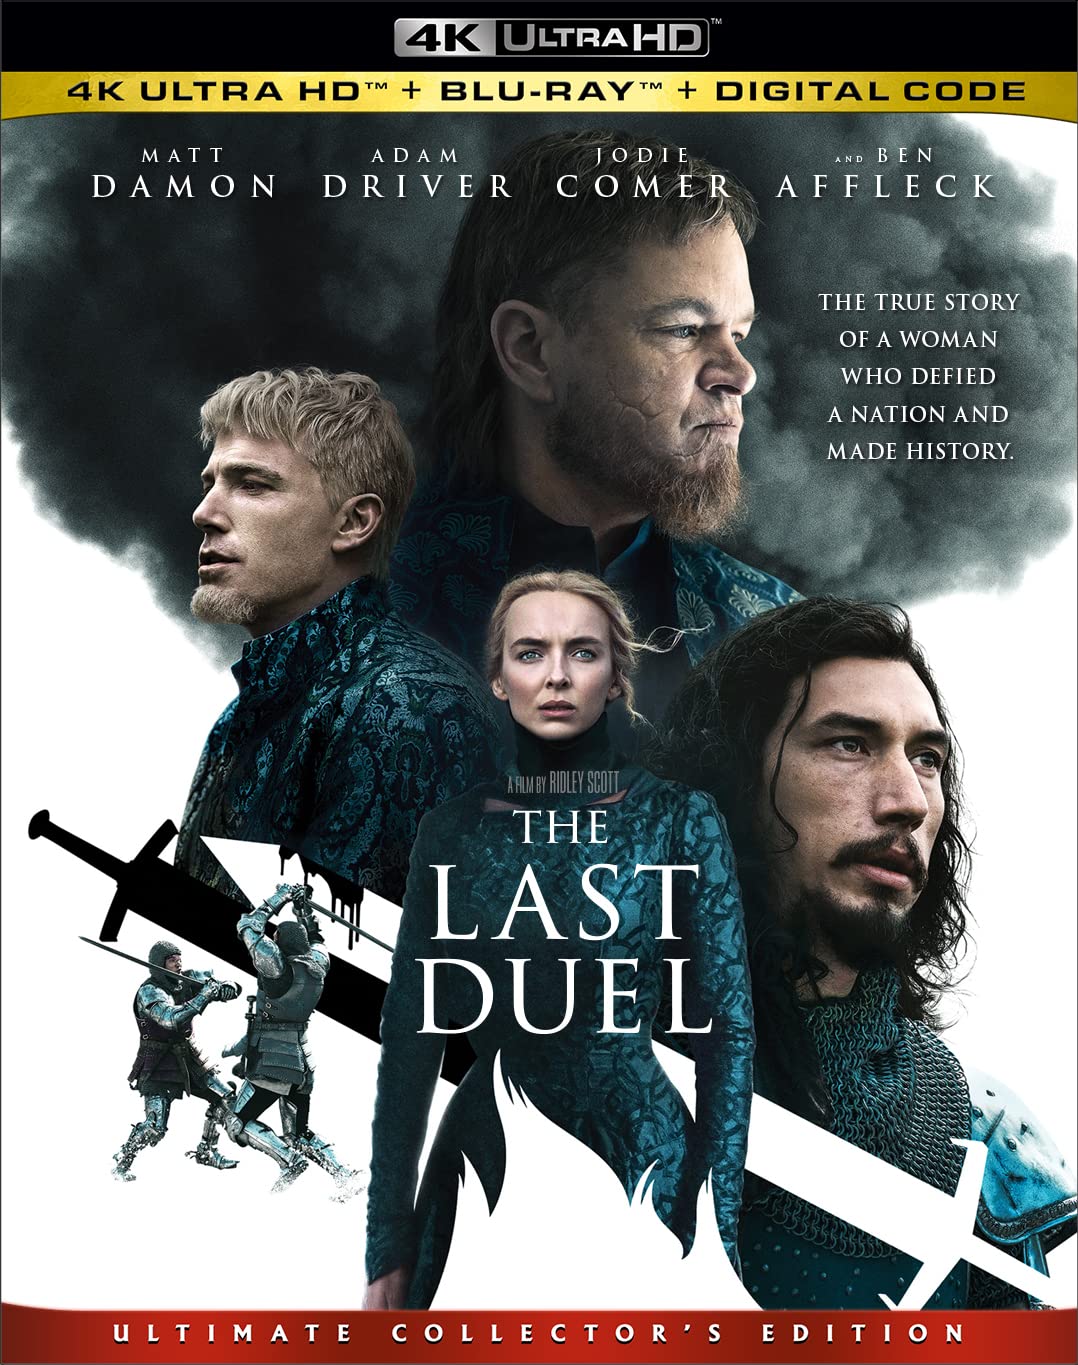 Jodie Comer The Last Duel Movie Wallpapers